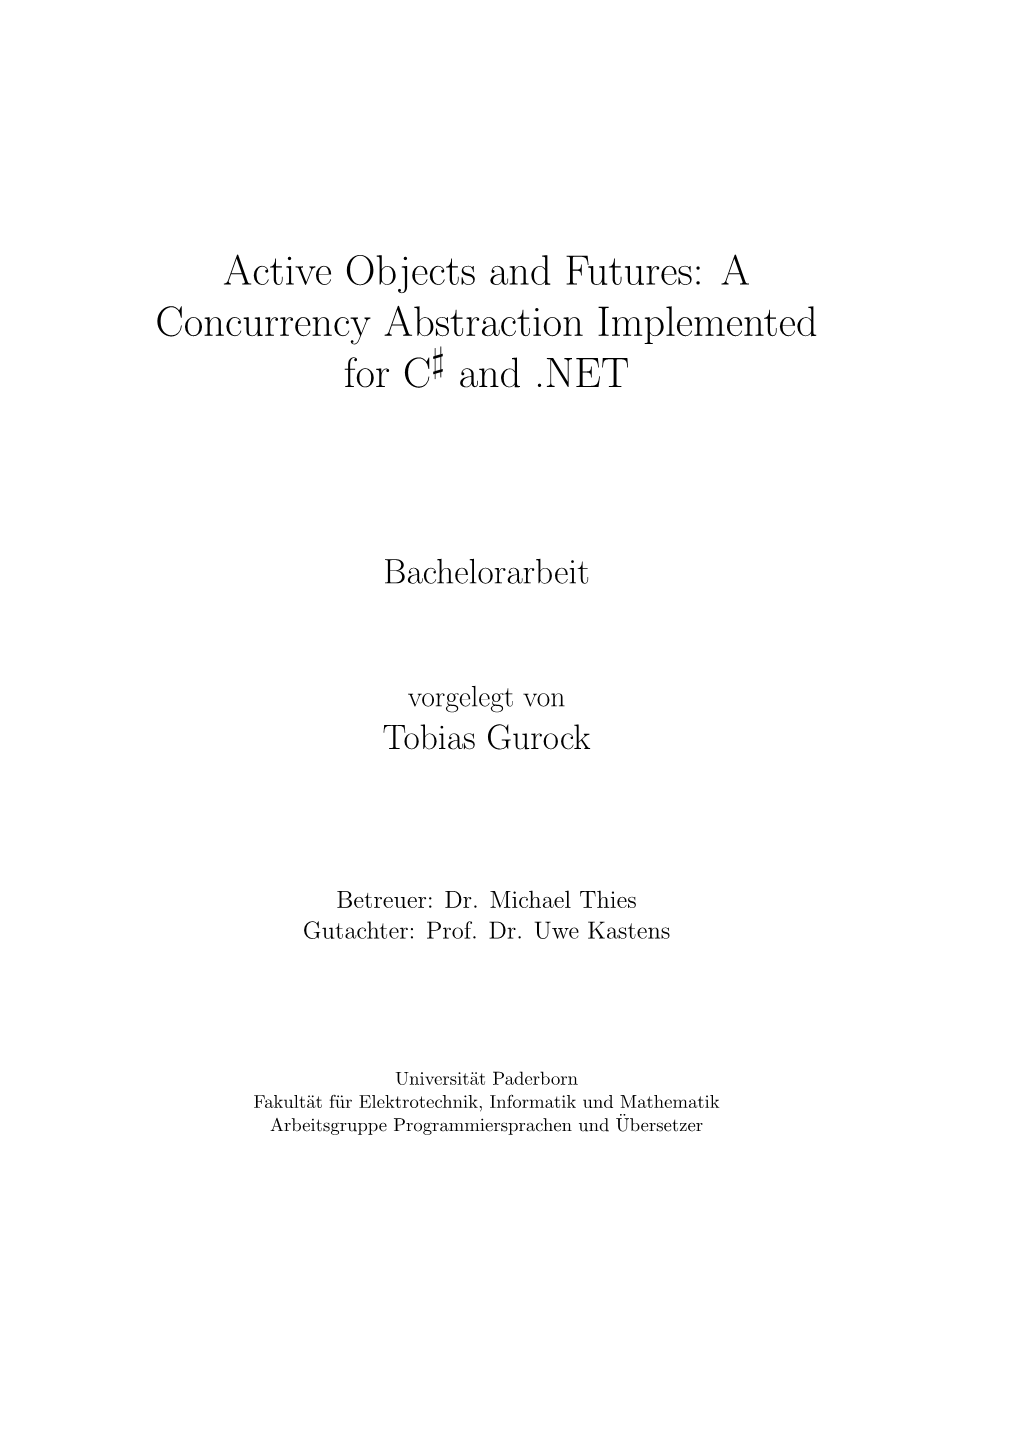 Active Objects and Futures: a Concurrency Abstraction Implemented for C♯ and .NET